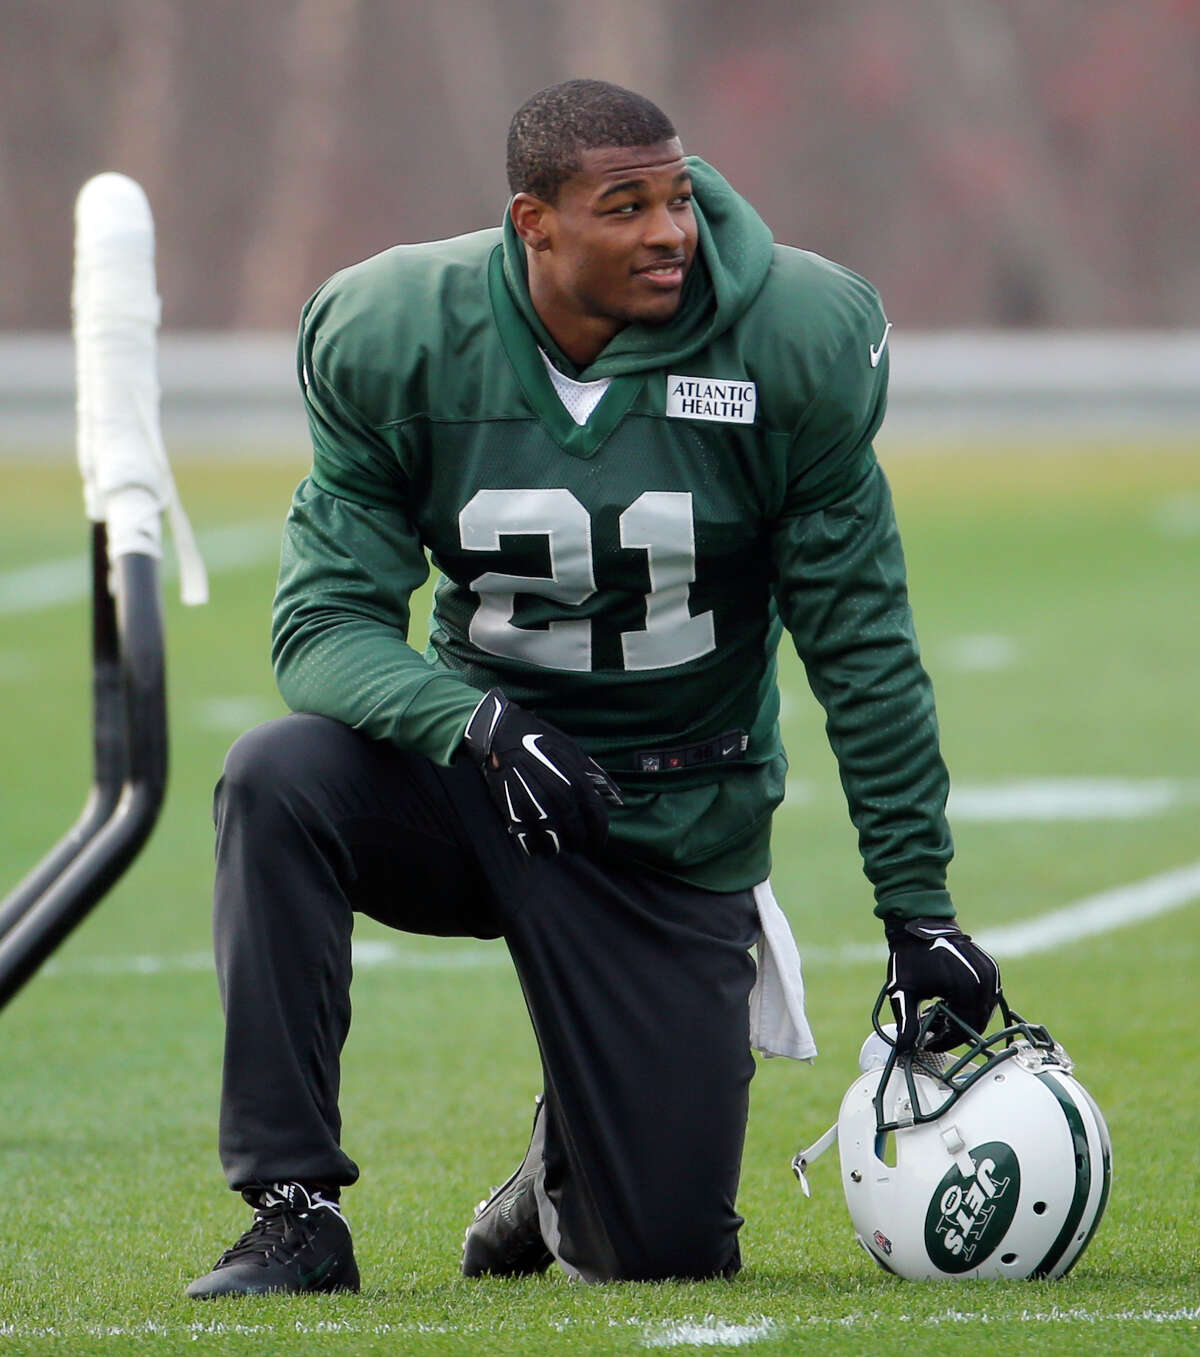 FILE - In this Dec. 9, 2015, file photo, New York Jets free safety Marcus Gilchrist watches during NFL football practice in Florham Park, N.J. The Jets have released Gilchris on Thursday, May 4, 2017, a move that appeared a strong possibility after the team drafted safeties with their first two picks last week. (AP Photo/Julio Cortez, File)